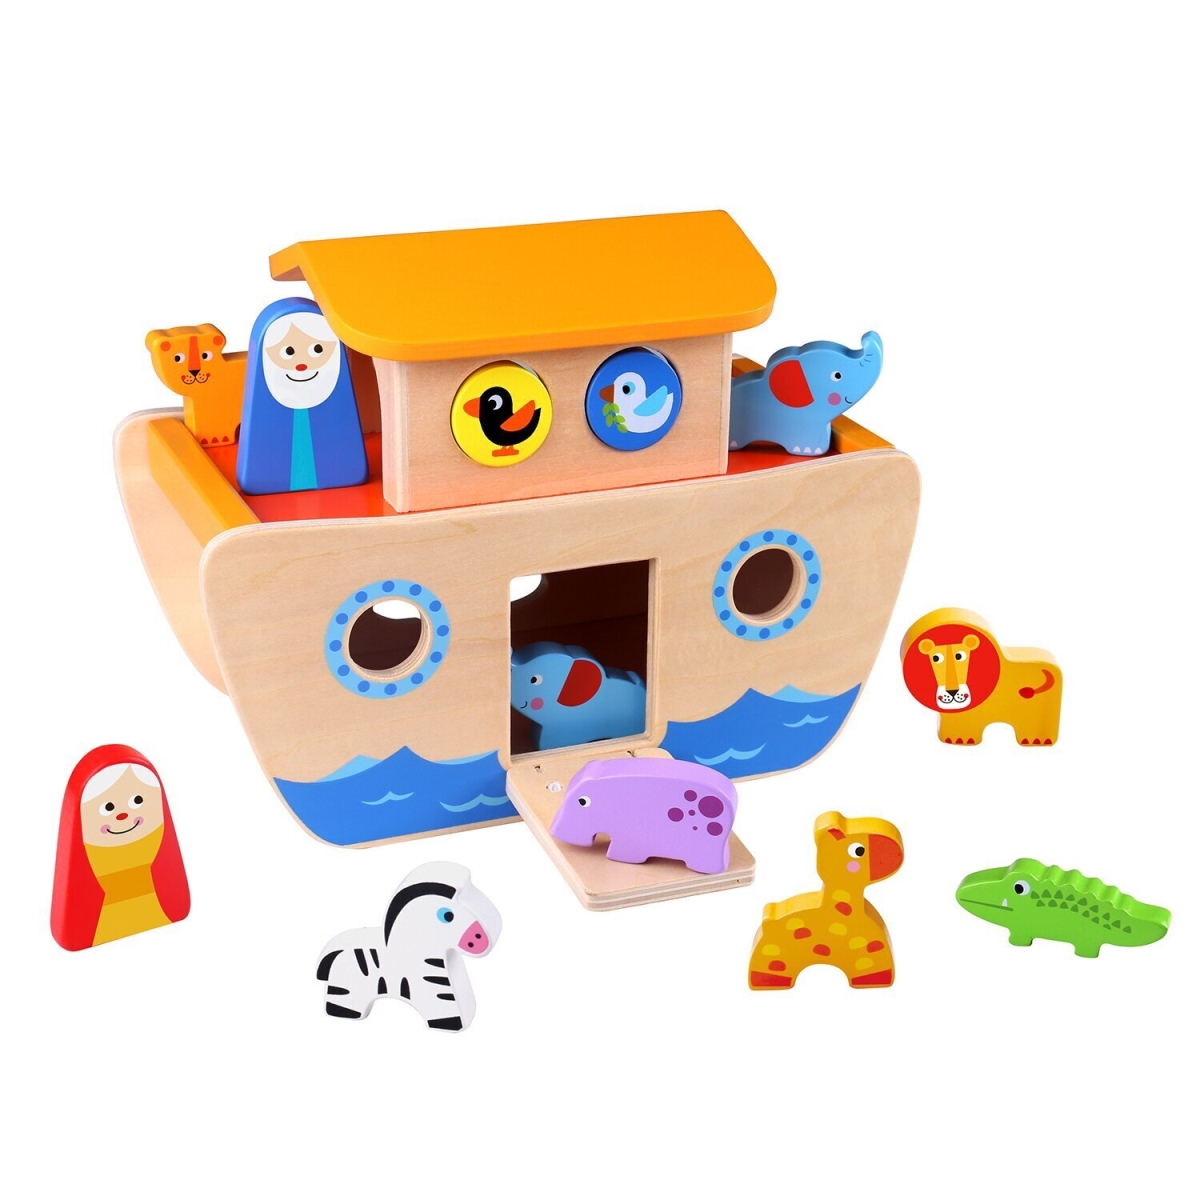 Picture of Tooky Toy 300333 26 x 14 x 19 cm Noahs Ark Play Set